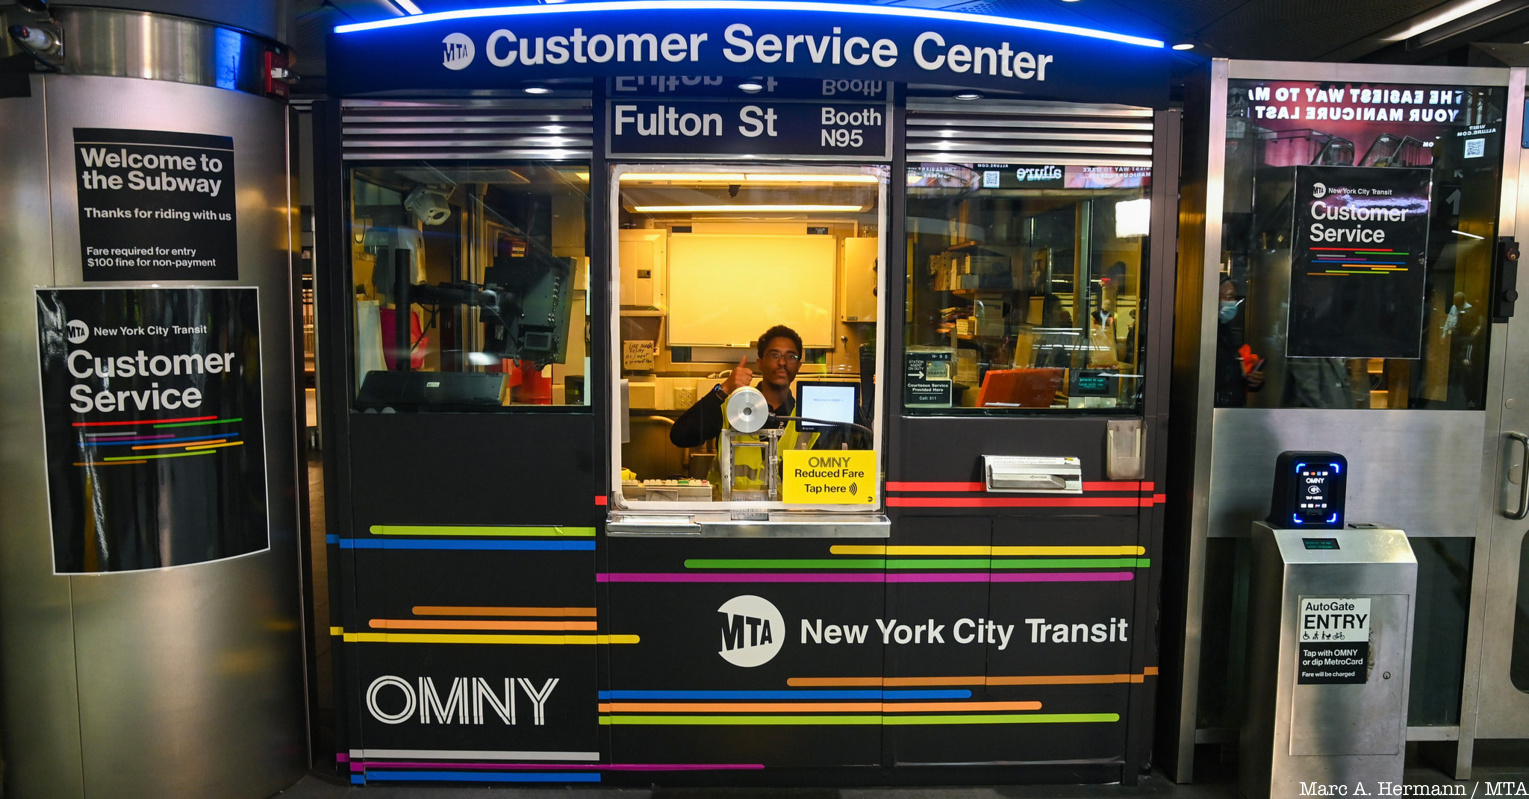 Subway booth converted into a customer service center